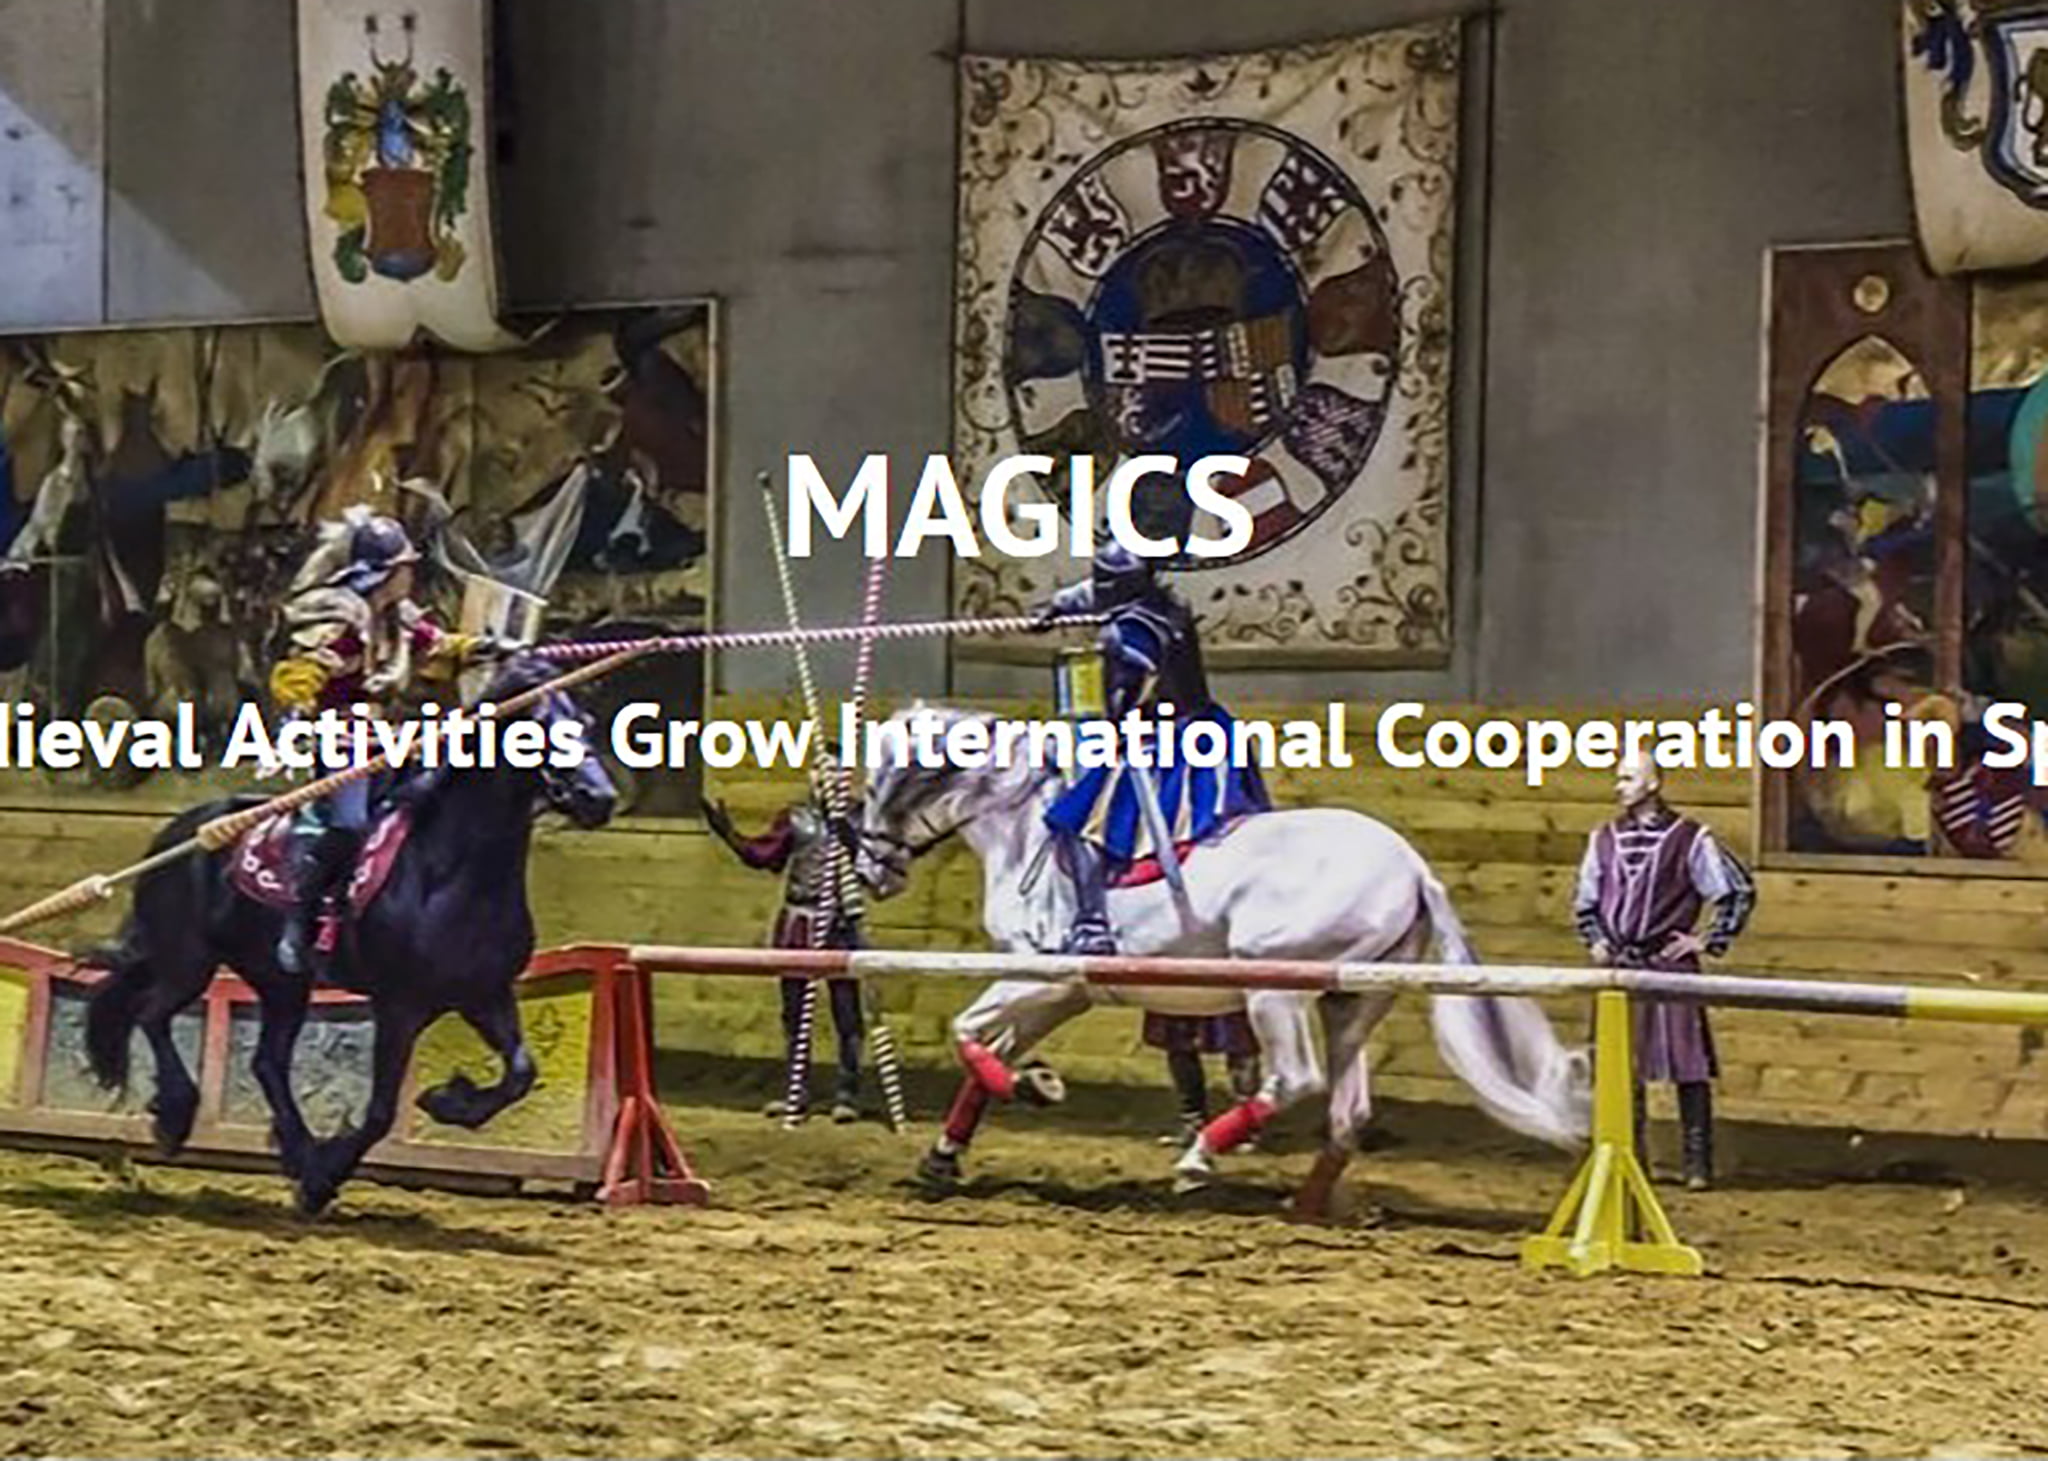 Proyecto MAGICS – Medieval Activities Grow International Cooperation in Sports